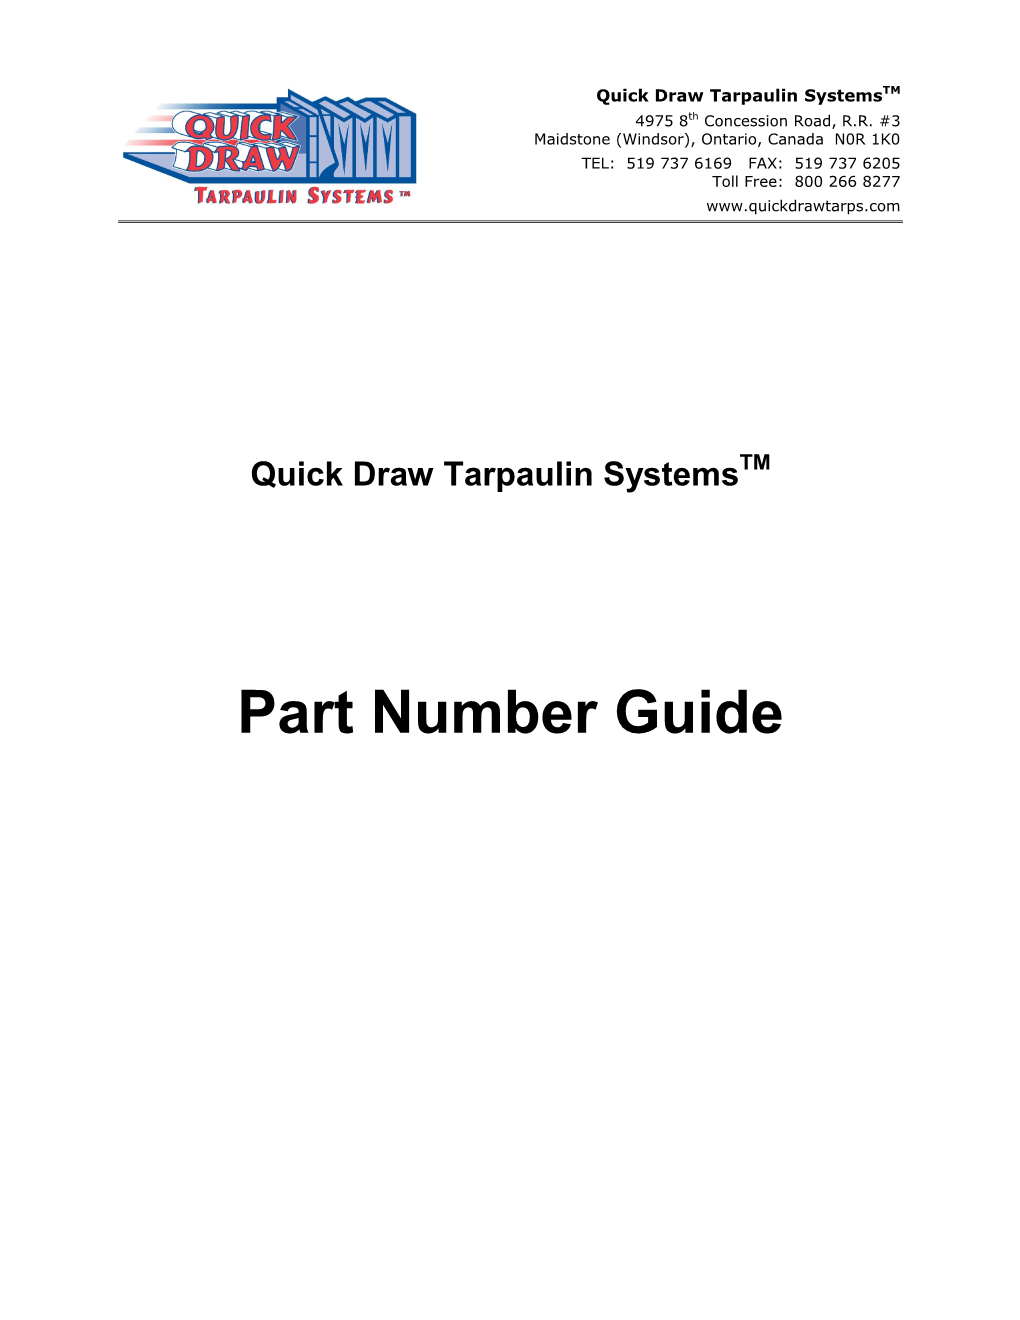 Part Number Guide